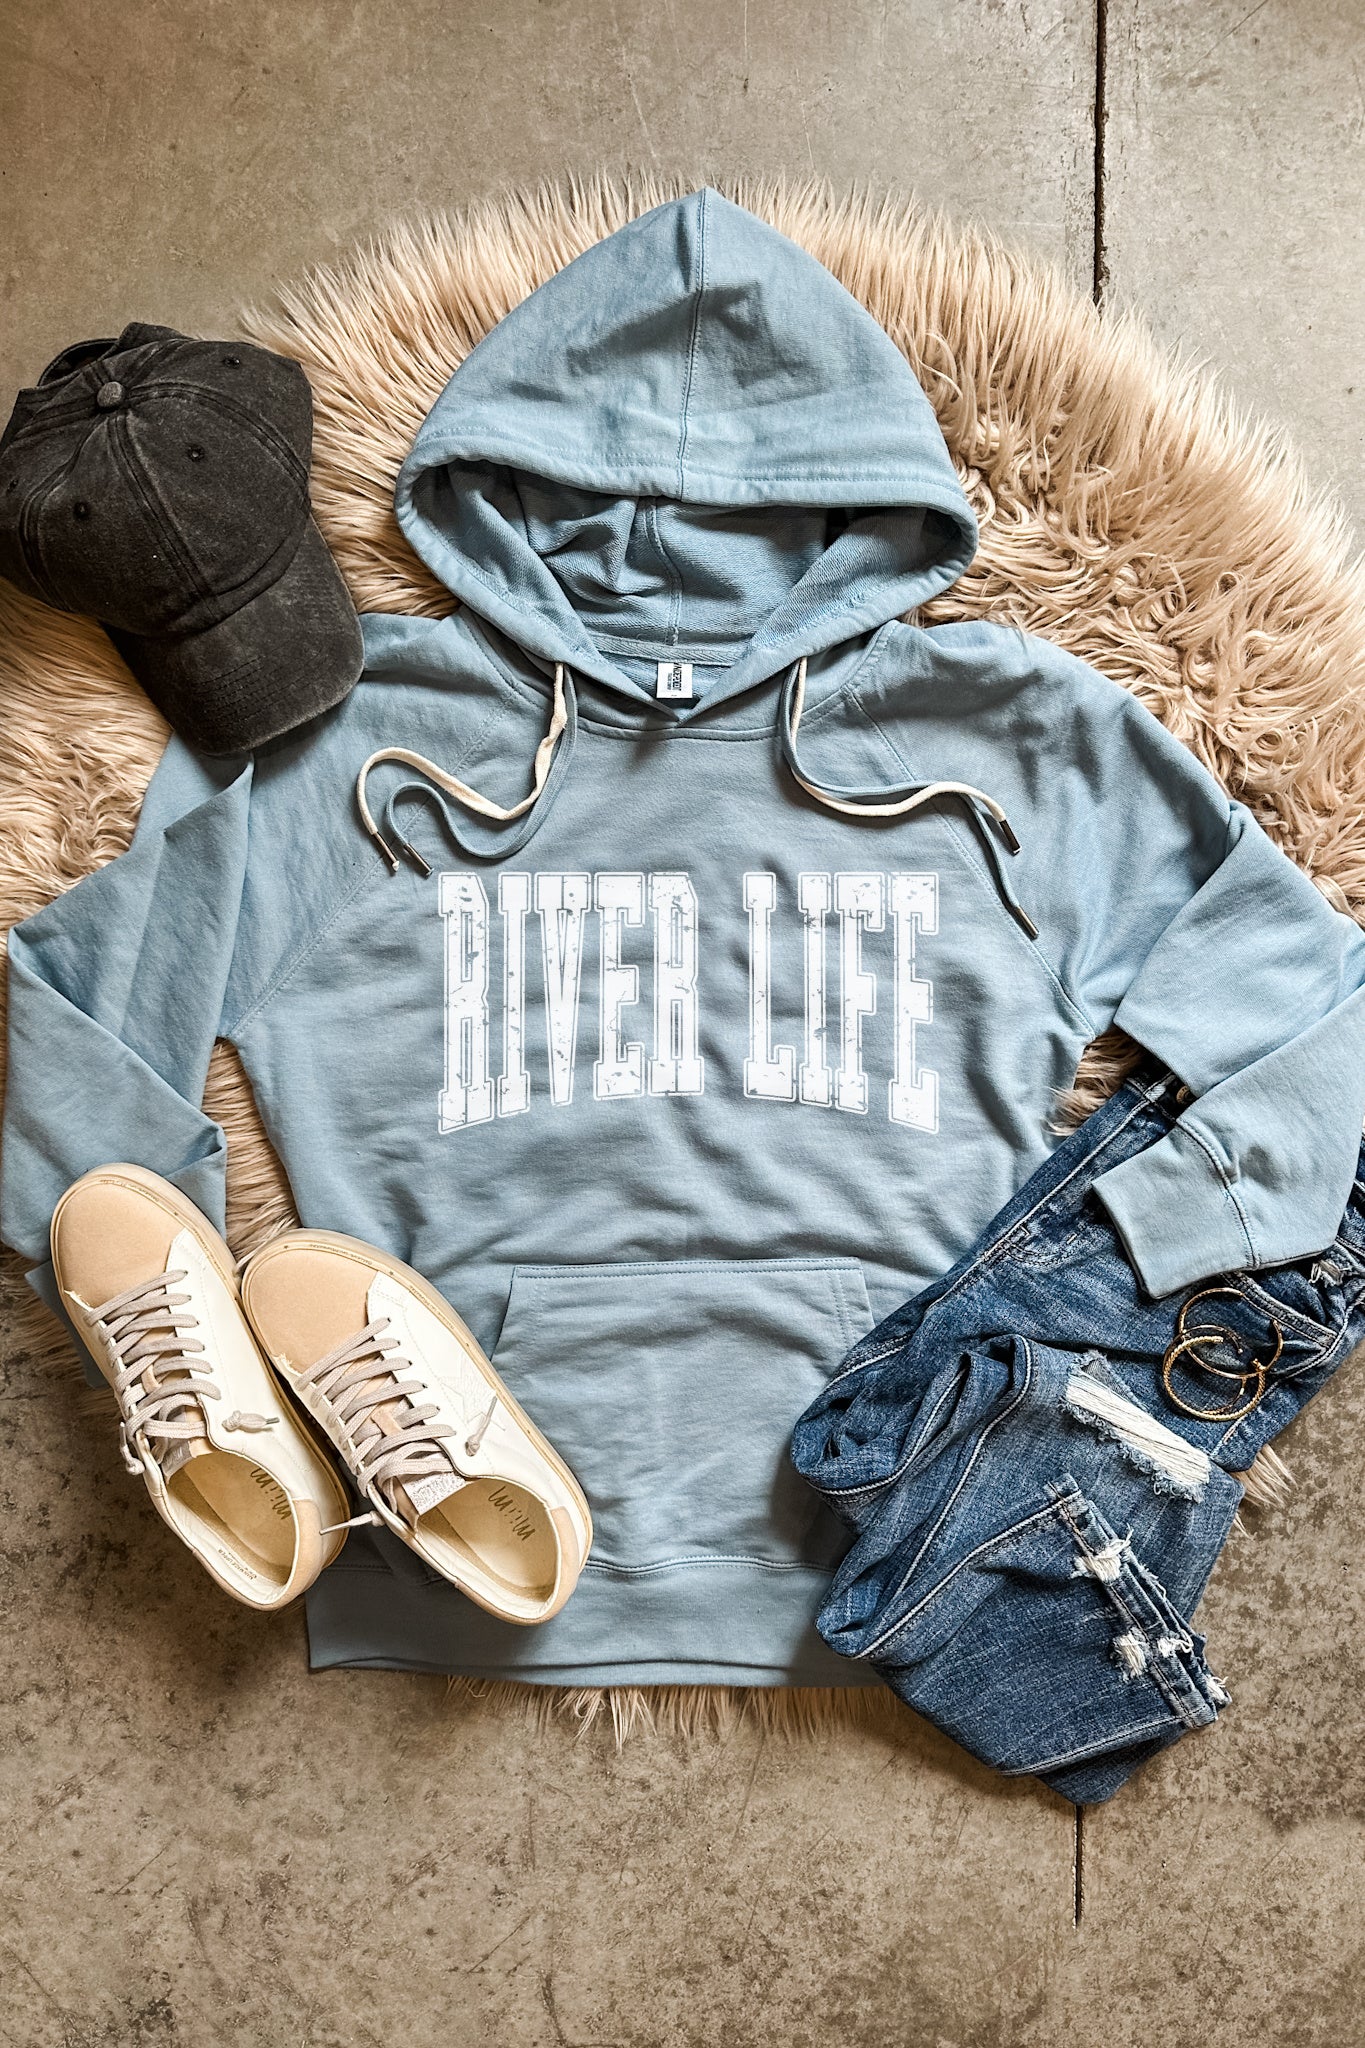 River Life Double String Hoodie - Misty Blue